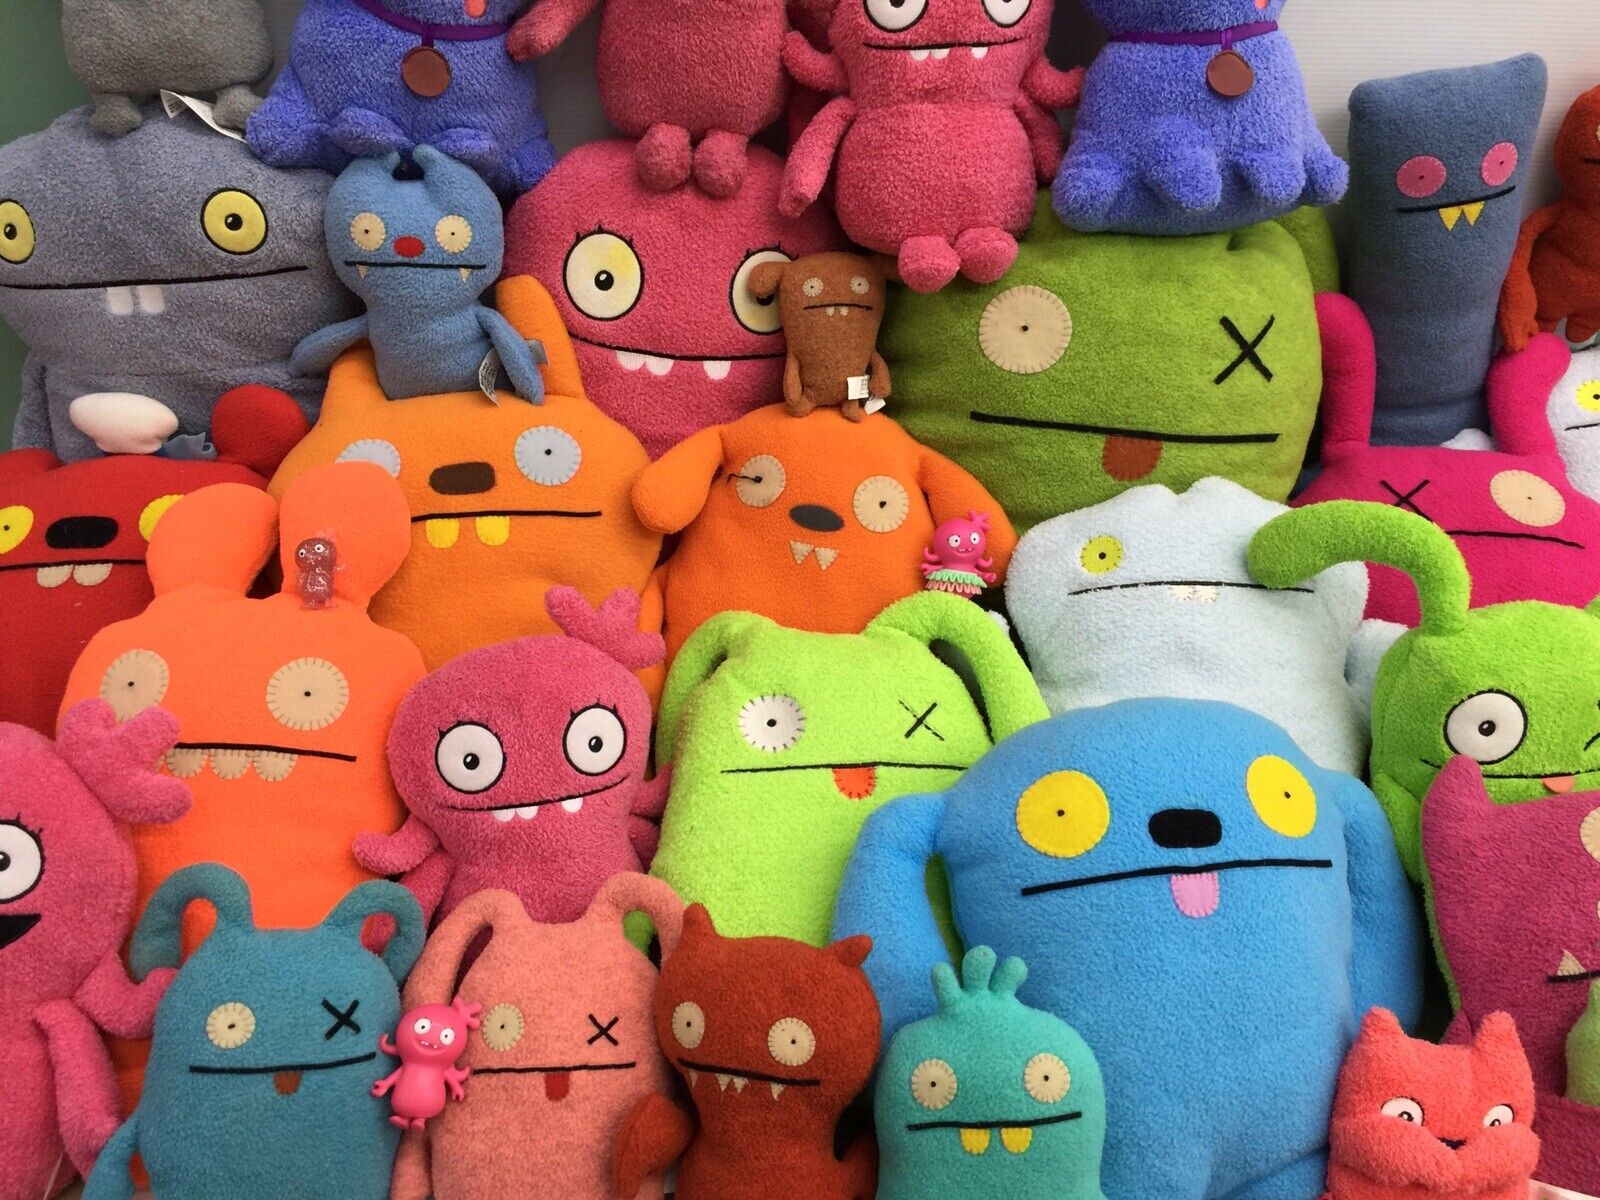 LOT of 35 Ugly Dolls Hasbro Plush Monster Animal Toys Creepy Cute Collectibles